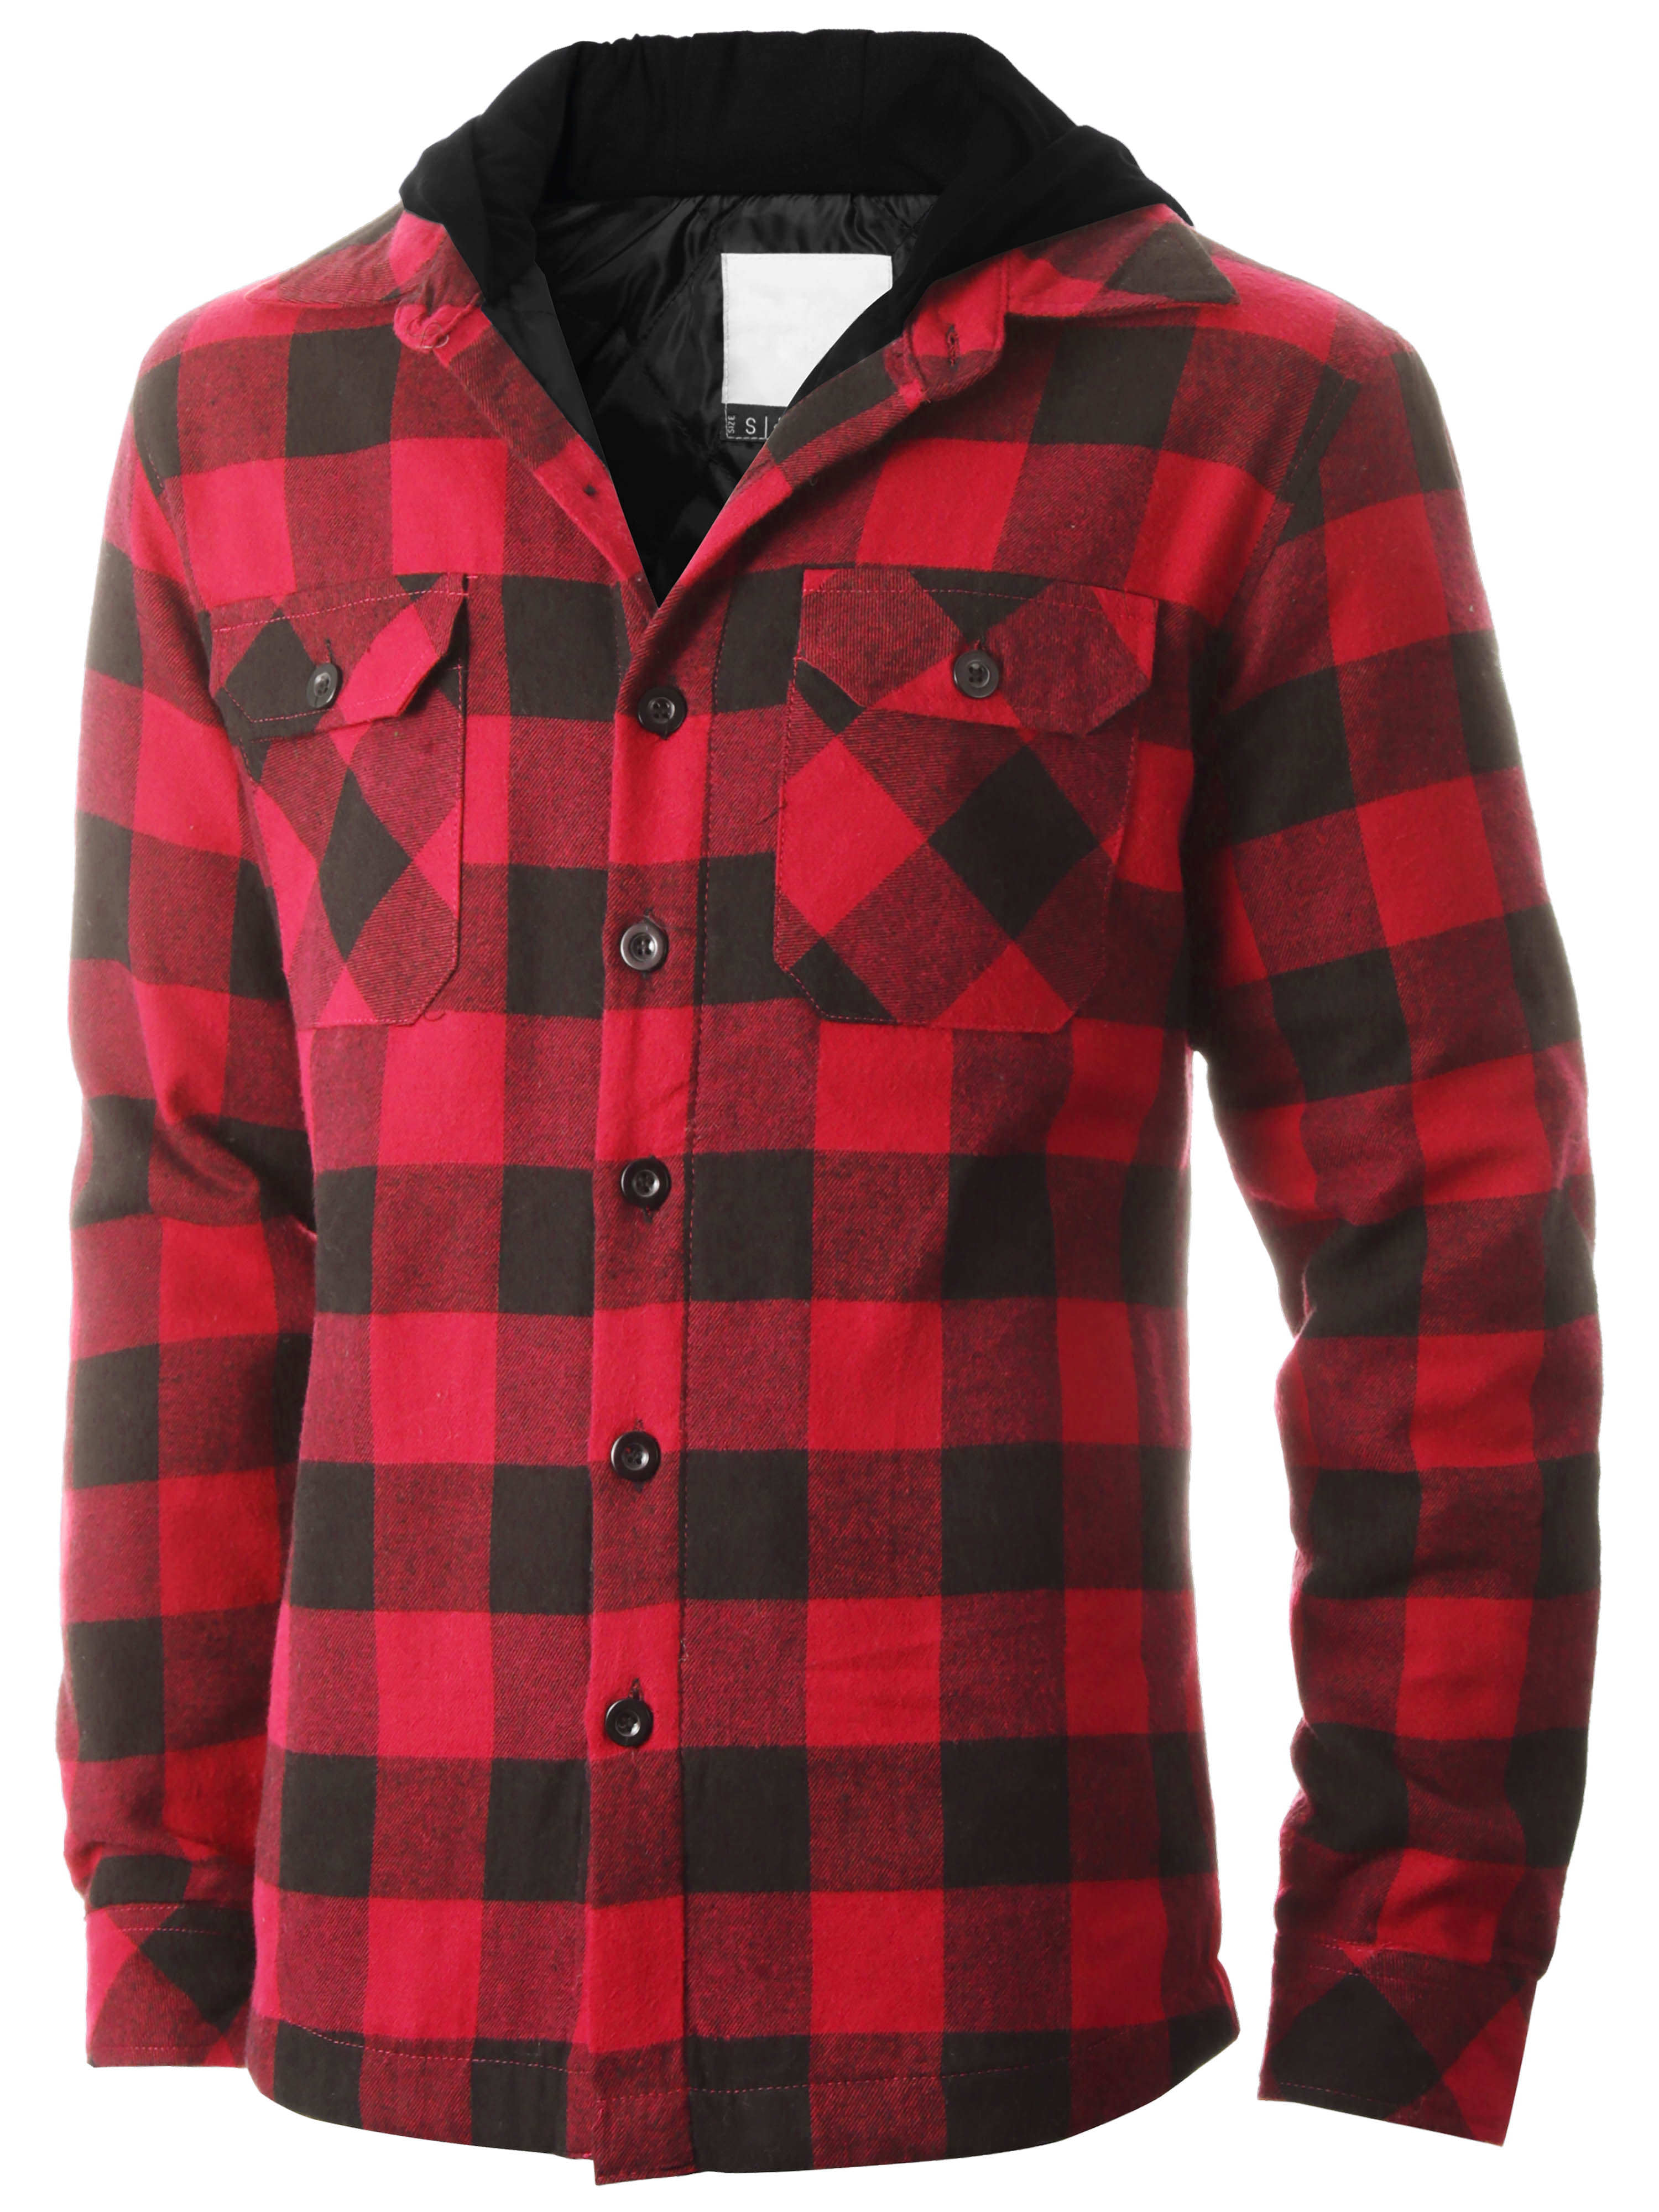 Ma Croix Mens Hooded Flannel Shirts Quilted Plaid Jacket - Walmart.com